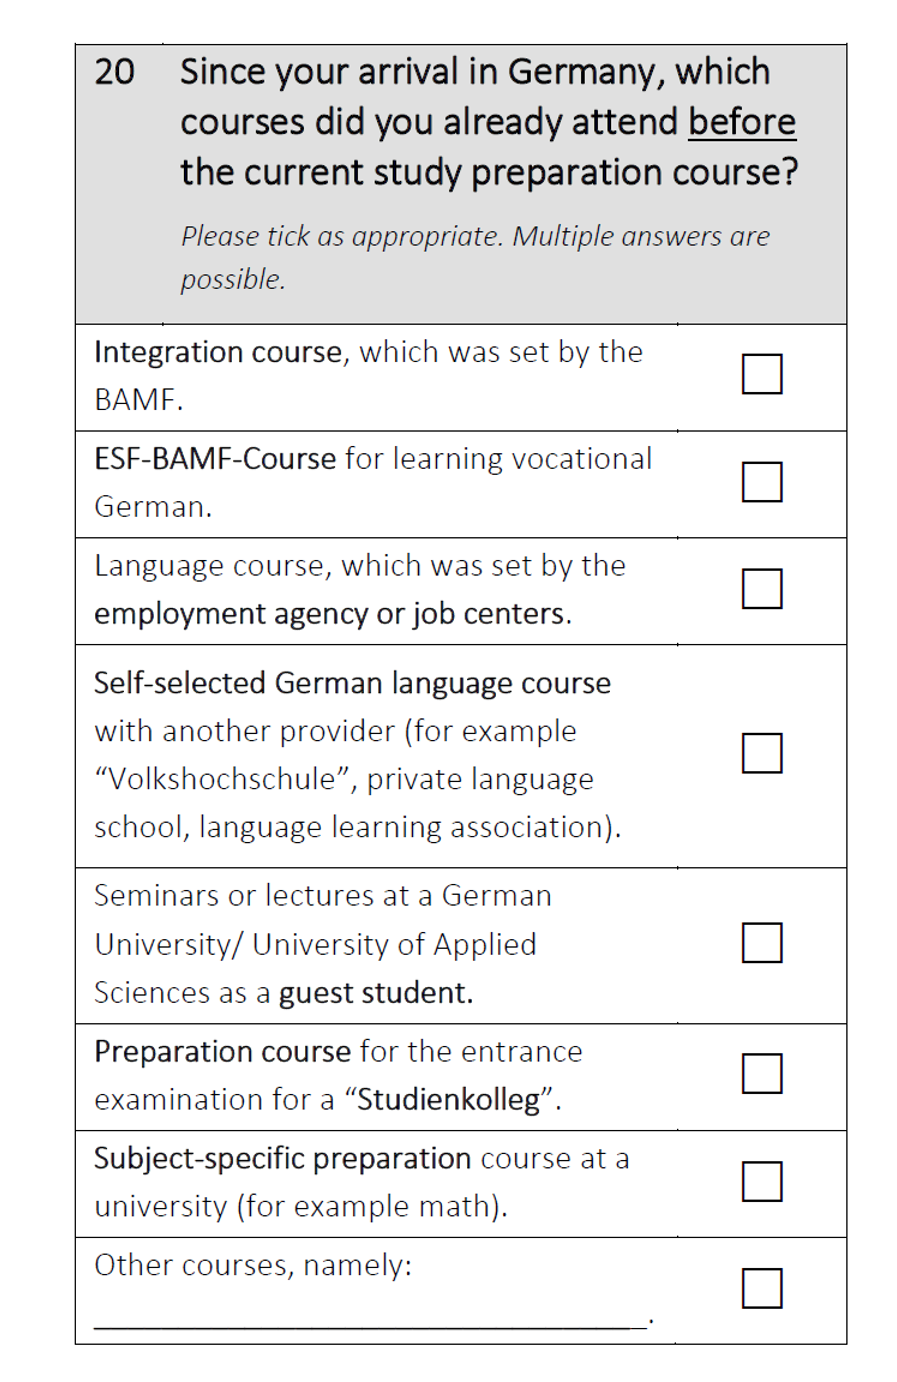 Since your arrival in Germany, which courses did you already attend before the current study preparation course?